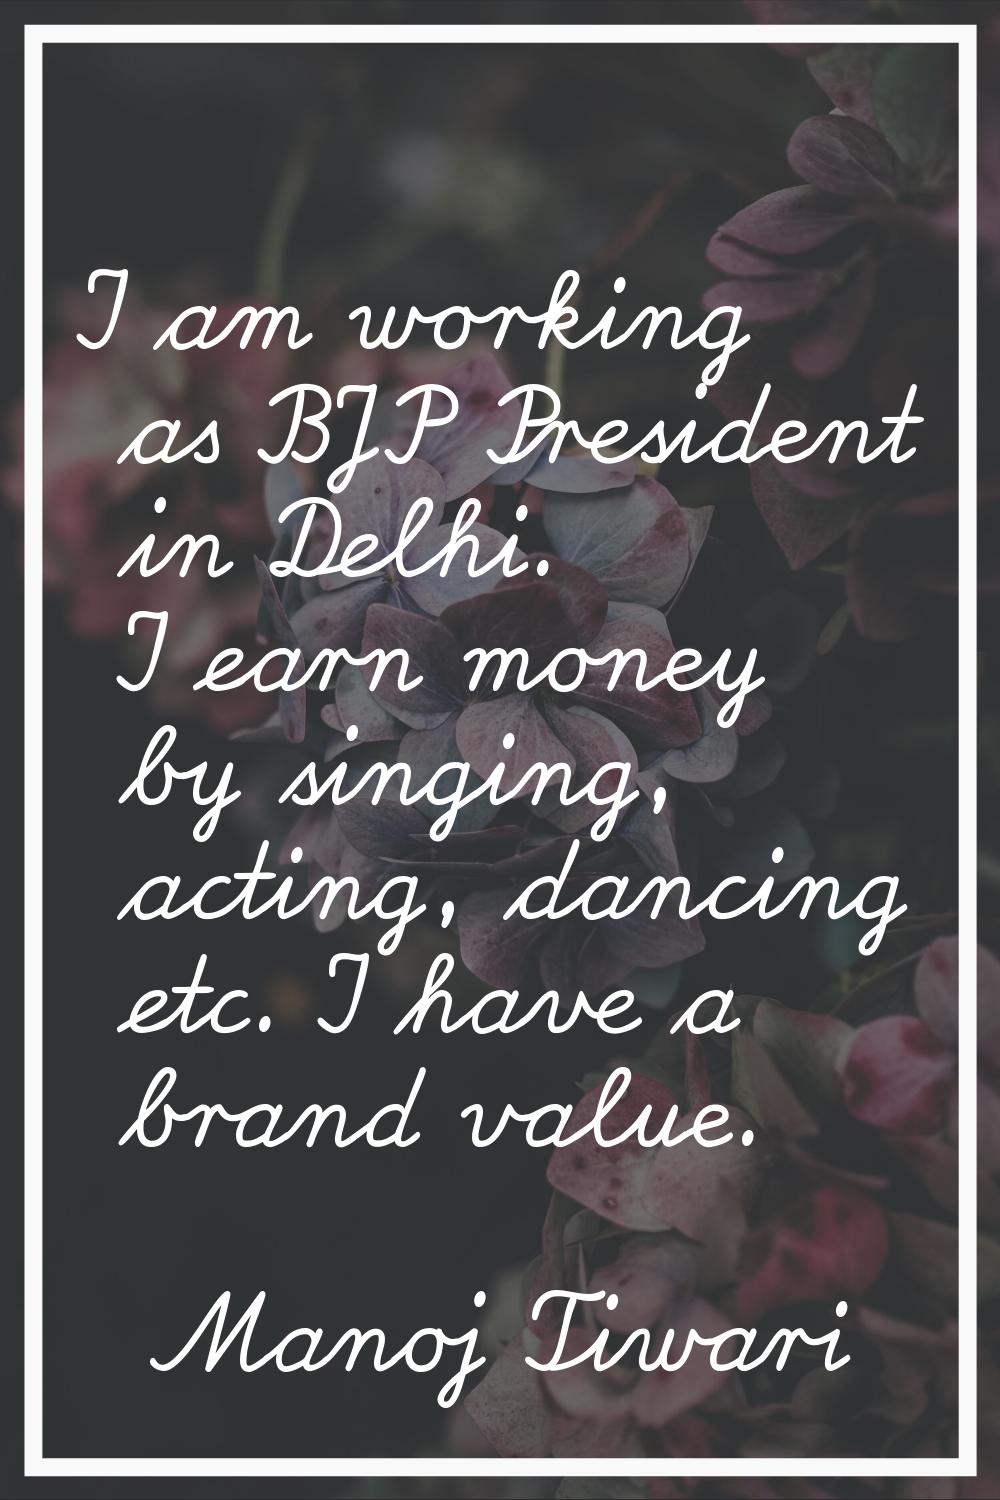 I am working as BJP President in Delhi. I earn money by singing, acting, dancing etc. I have a bran